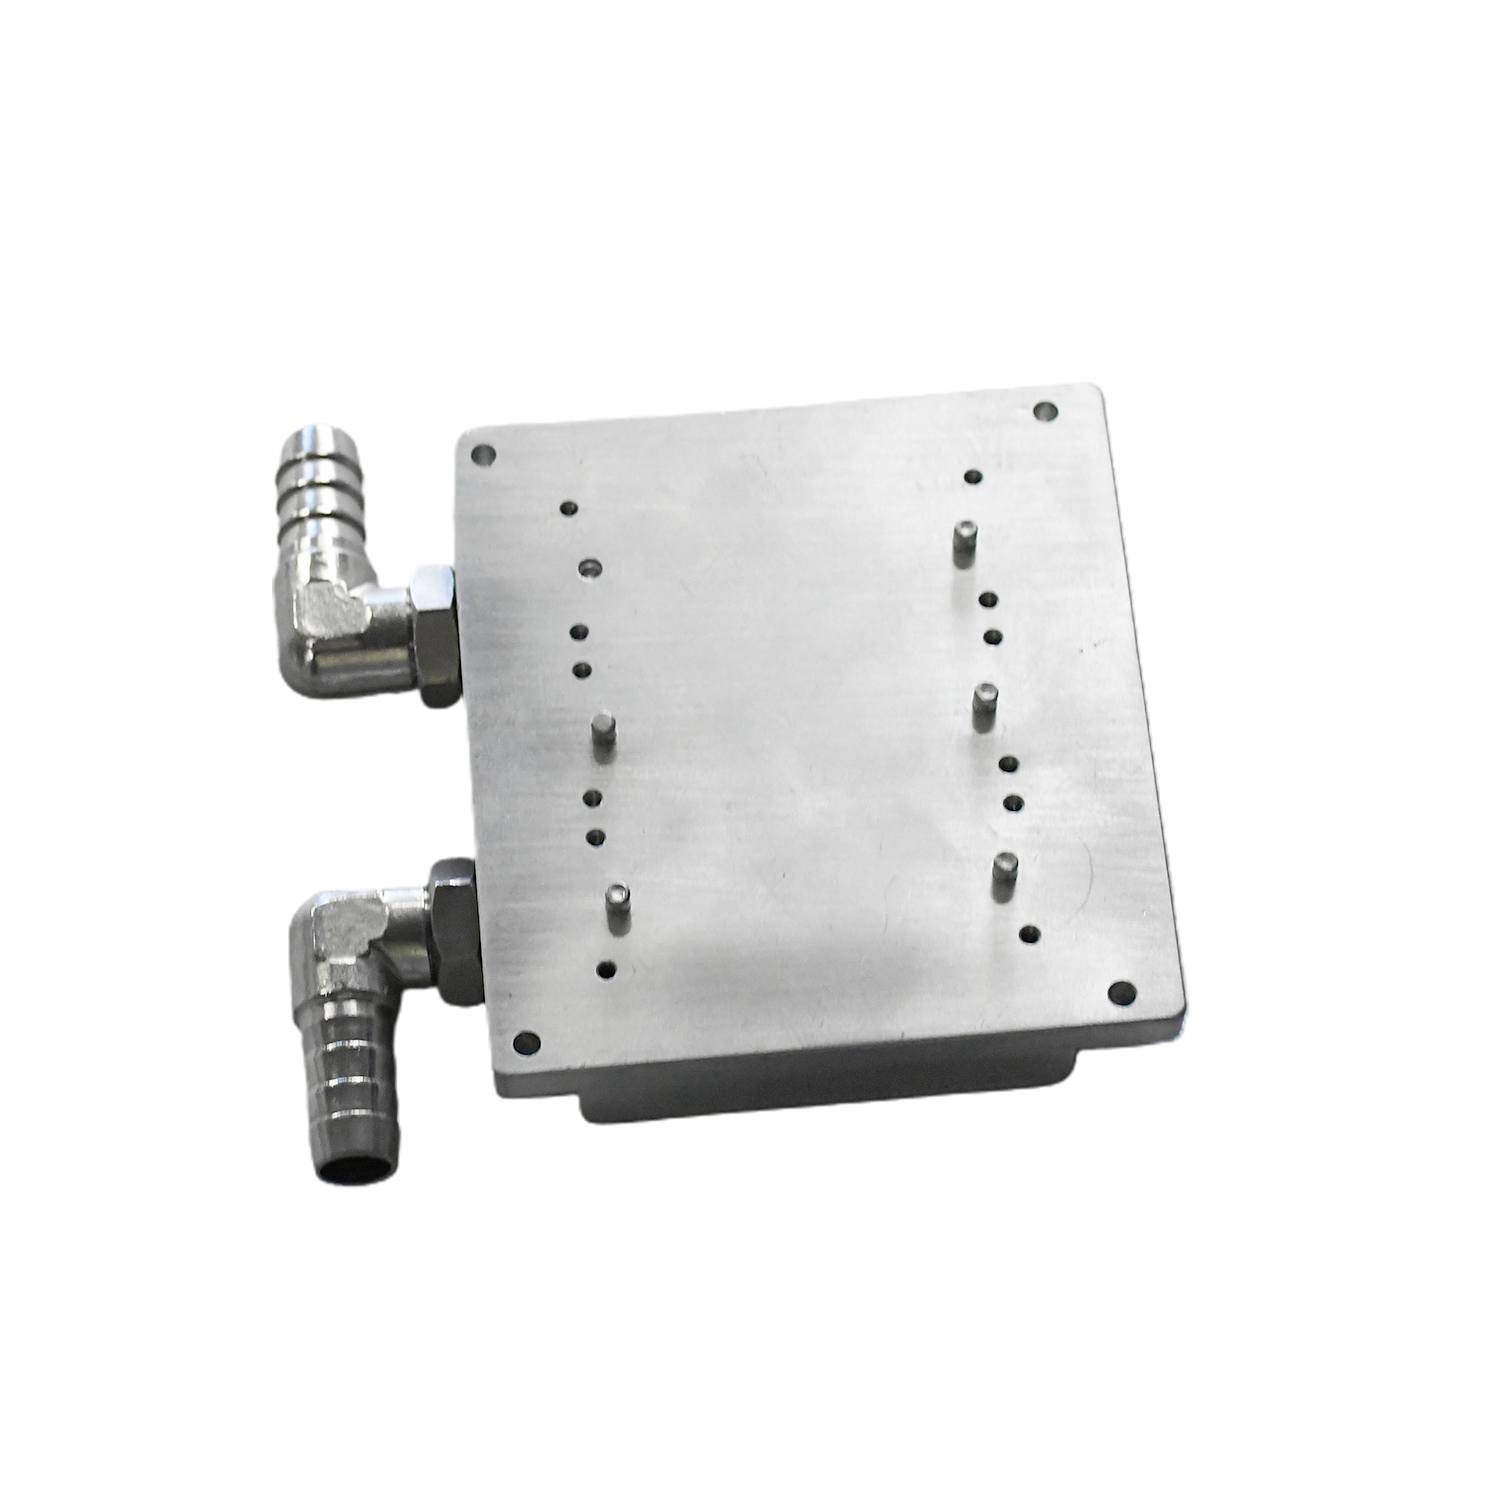 Refrigeration Anodized Aluminum Water Cooling Plate